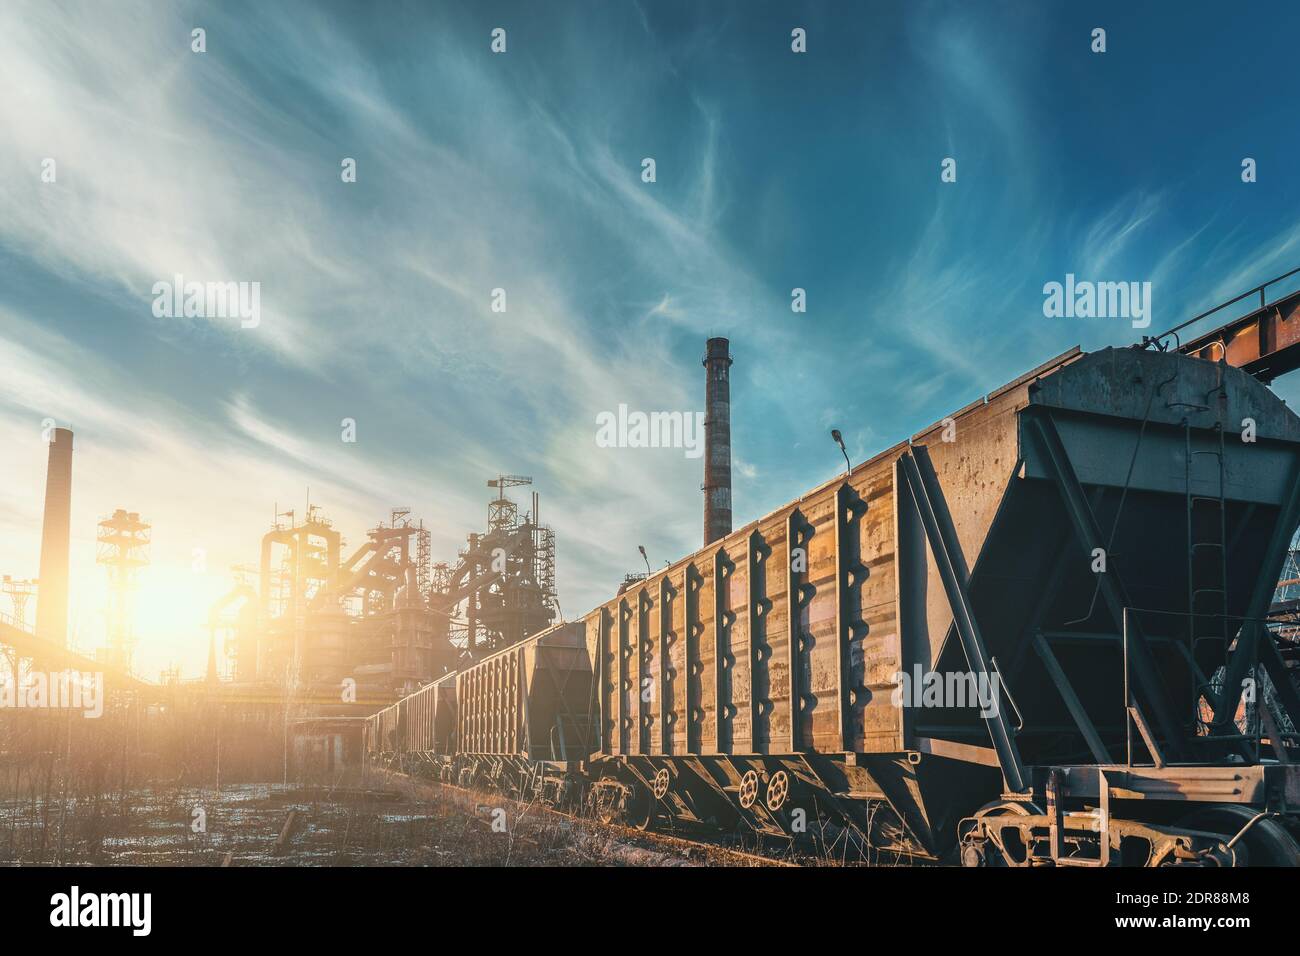 Blast furnace of metallurgical plant with industrial railroad and freight wagons. Stock Photo